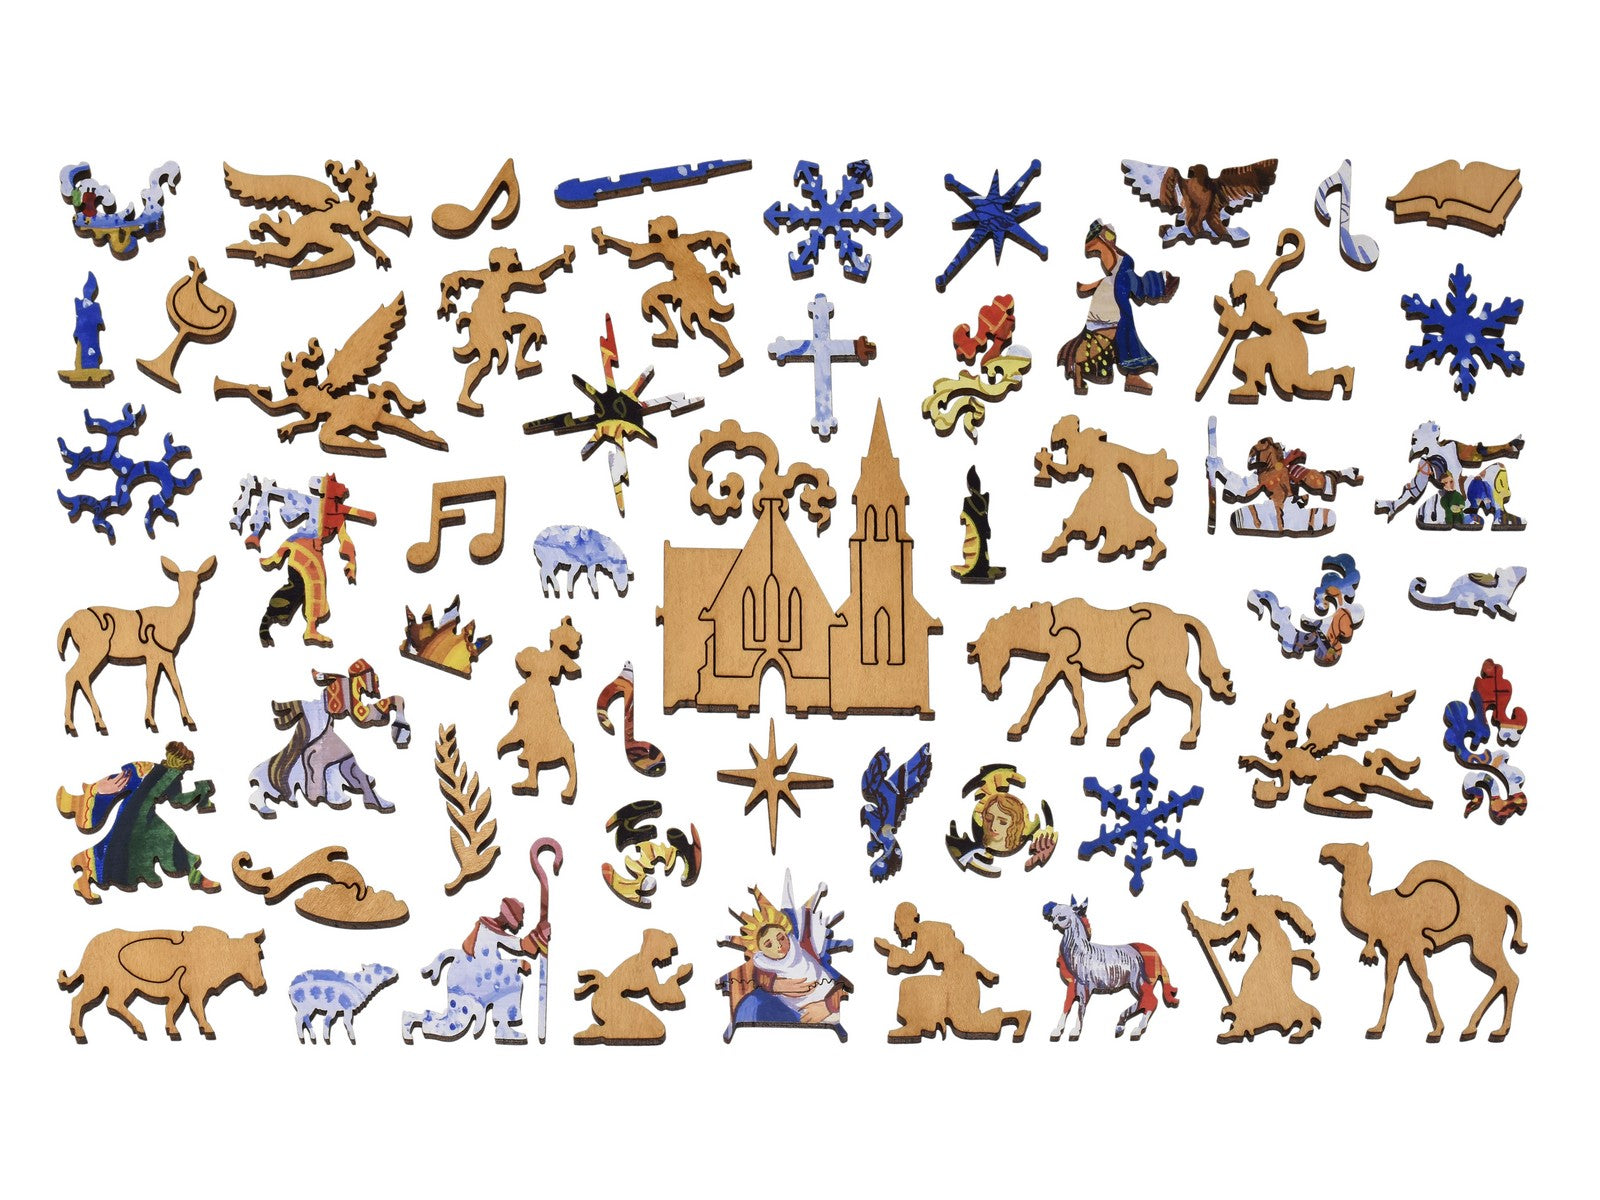 A closeup of the whimsy pieces that can be found in the puzzle, Nativity.